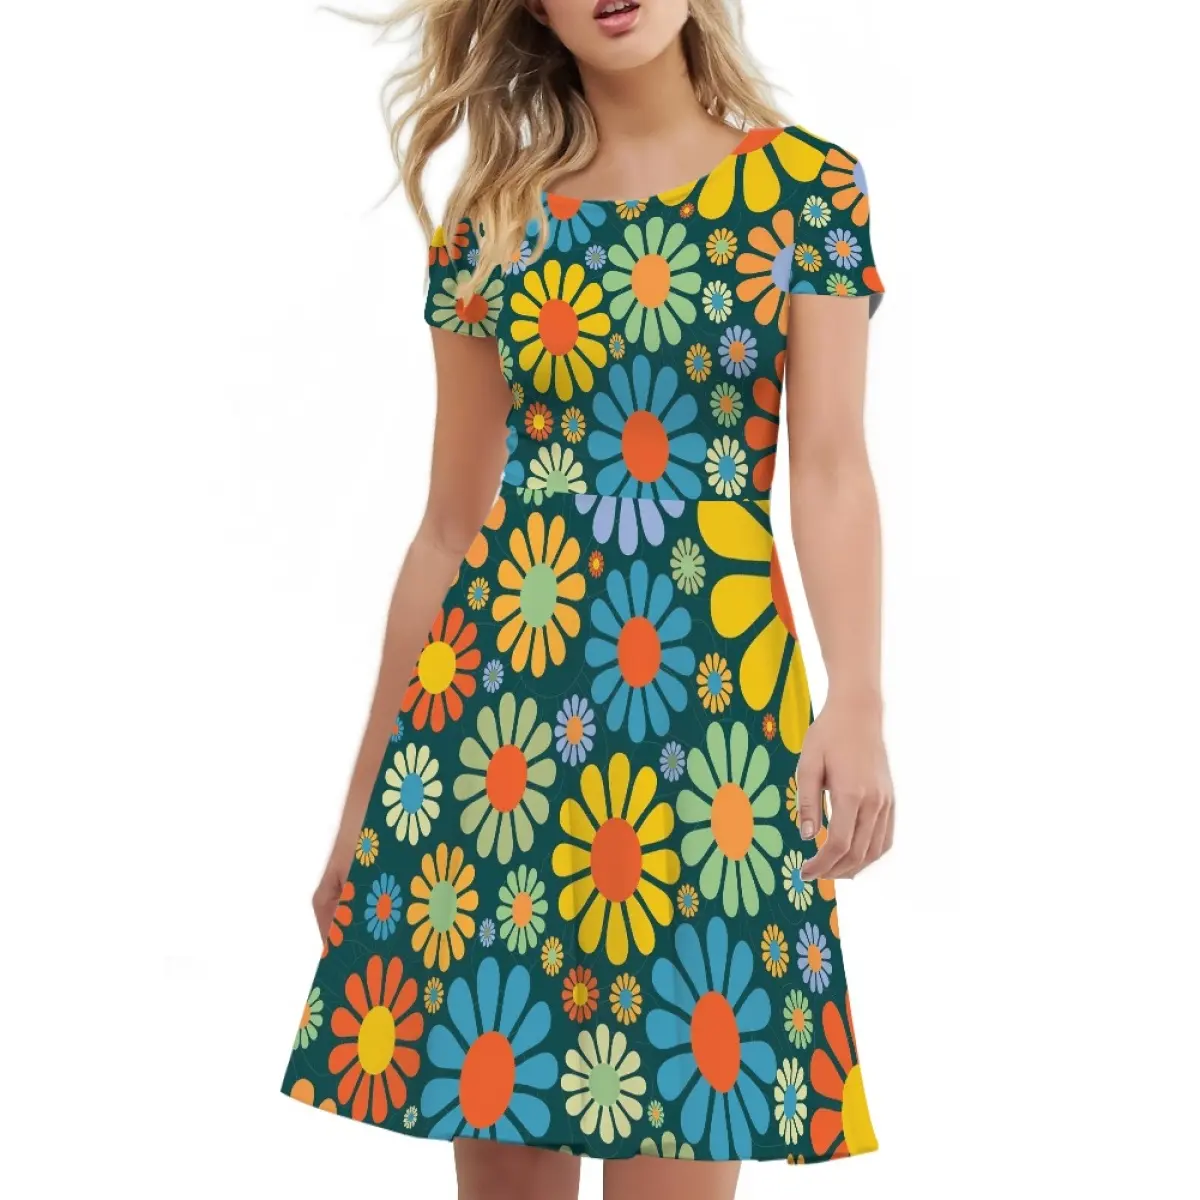 Suppliers Wholesale High Quality Women Girls Apparel Casual Dresses Hot Sell Custom Funny Hippy Floral Plus Size Women's Dresses